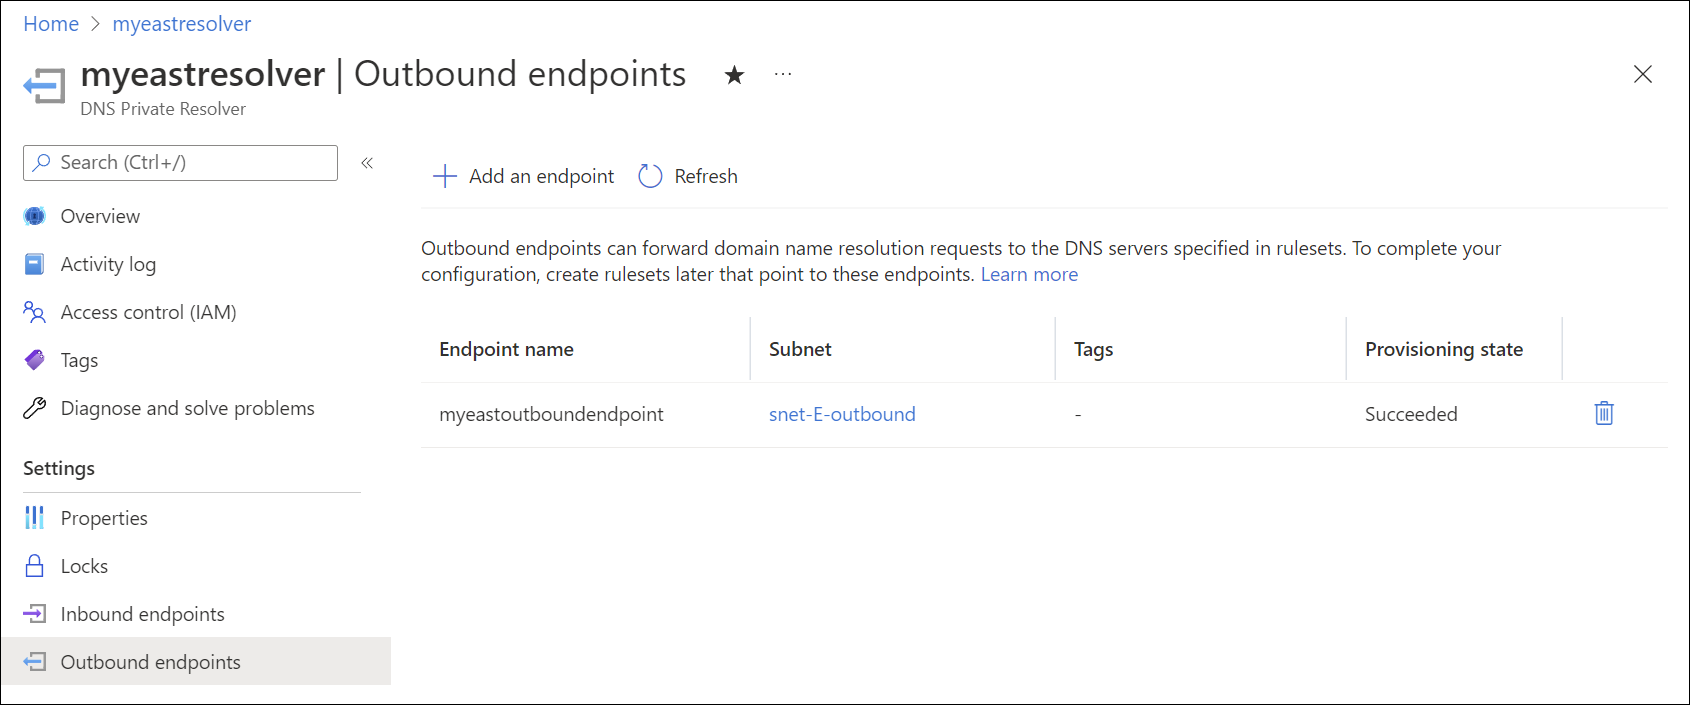 View outbound endpoints